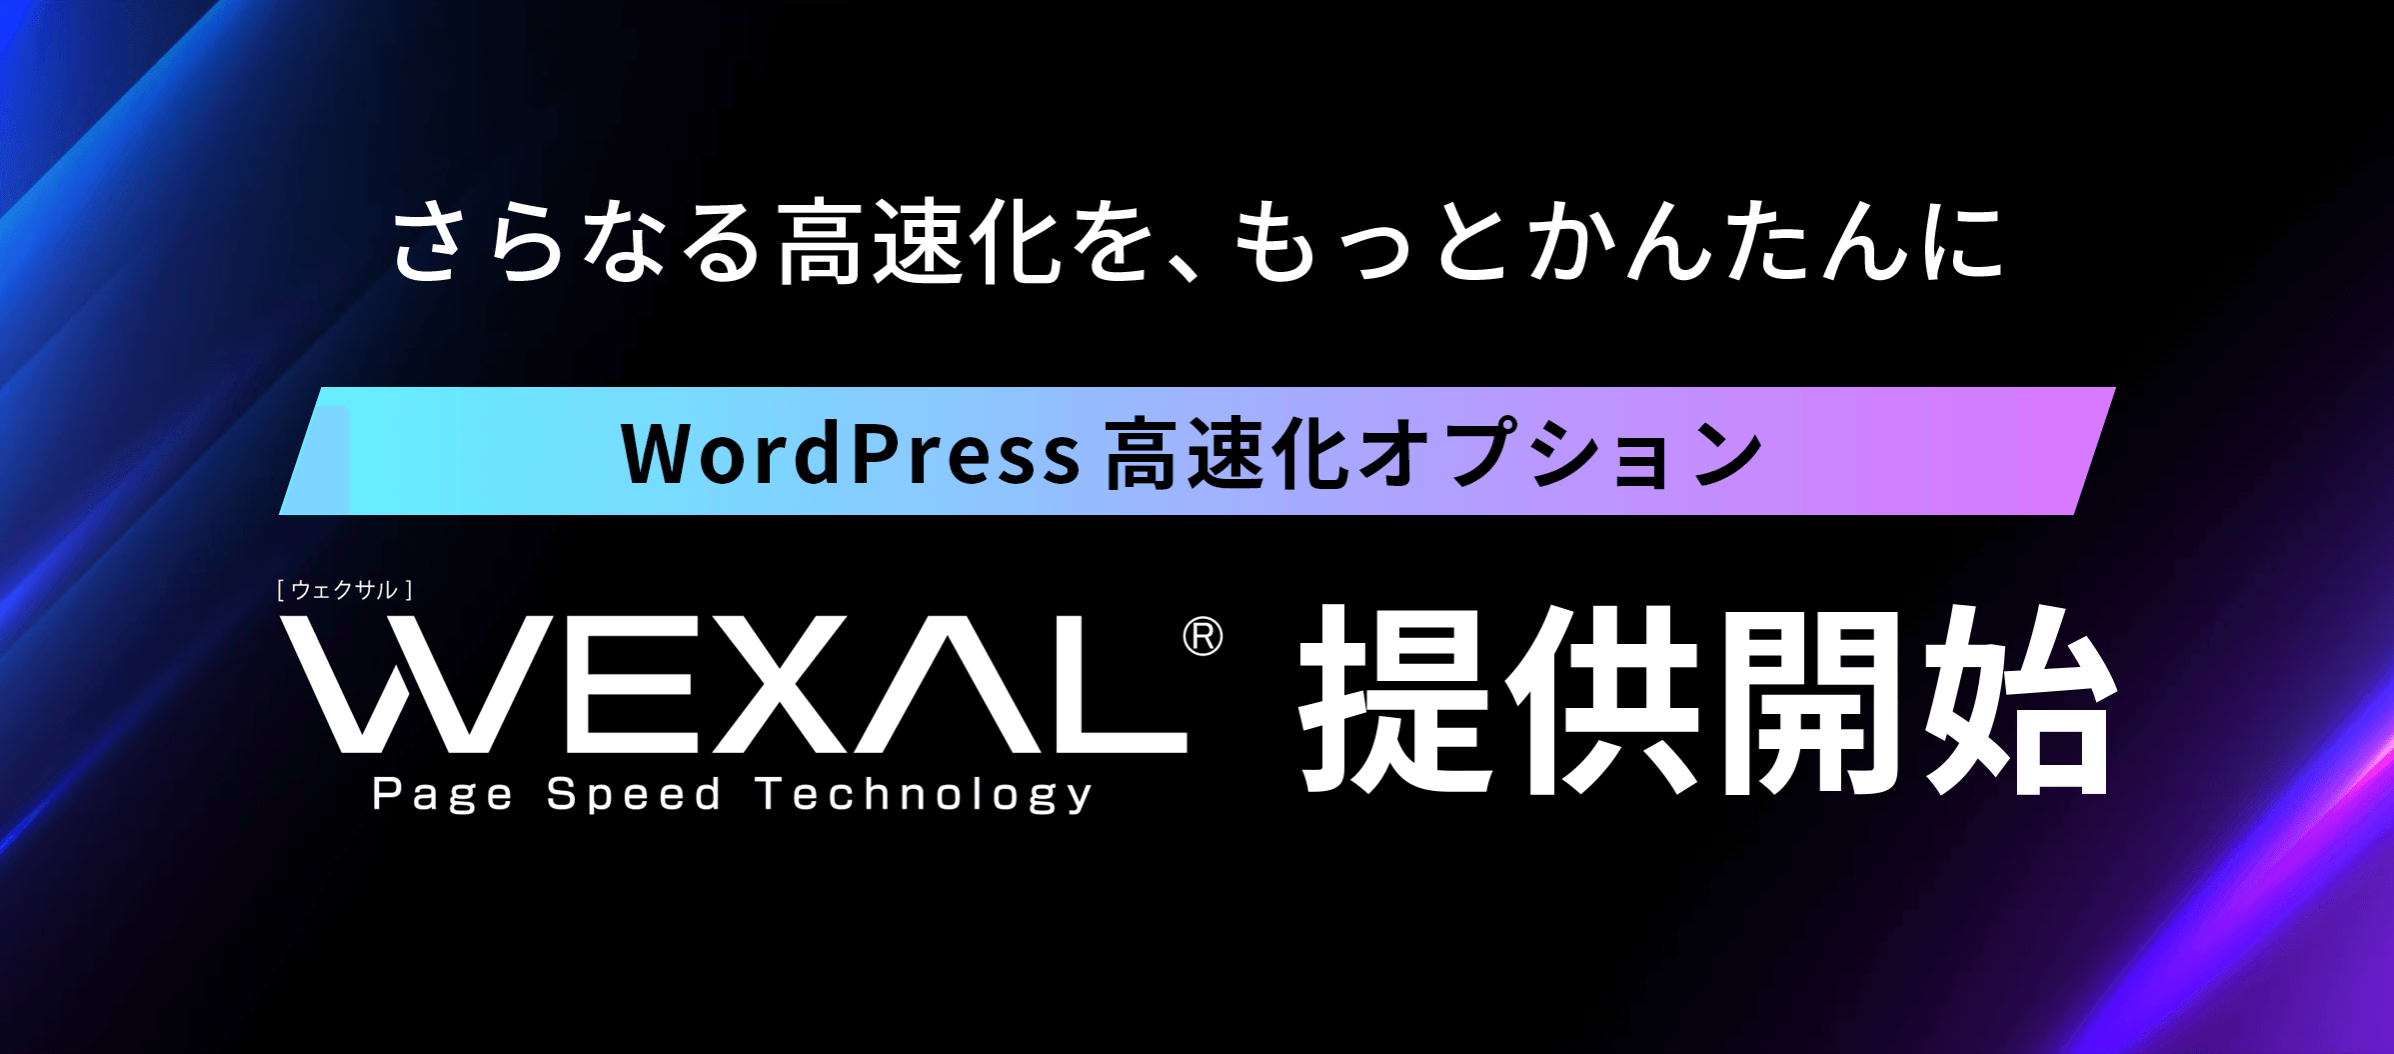 WEXAL® Page Speed Technology®を設定する